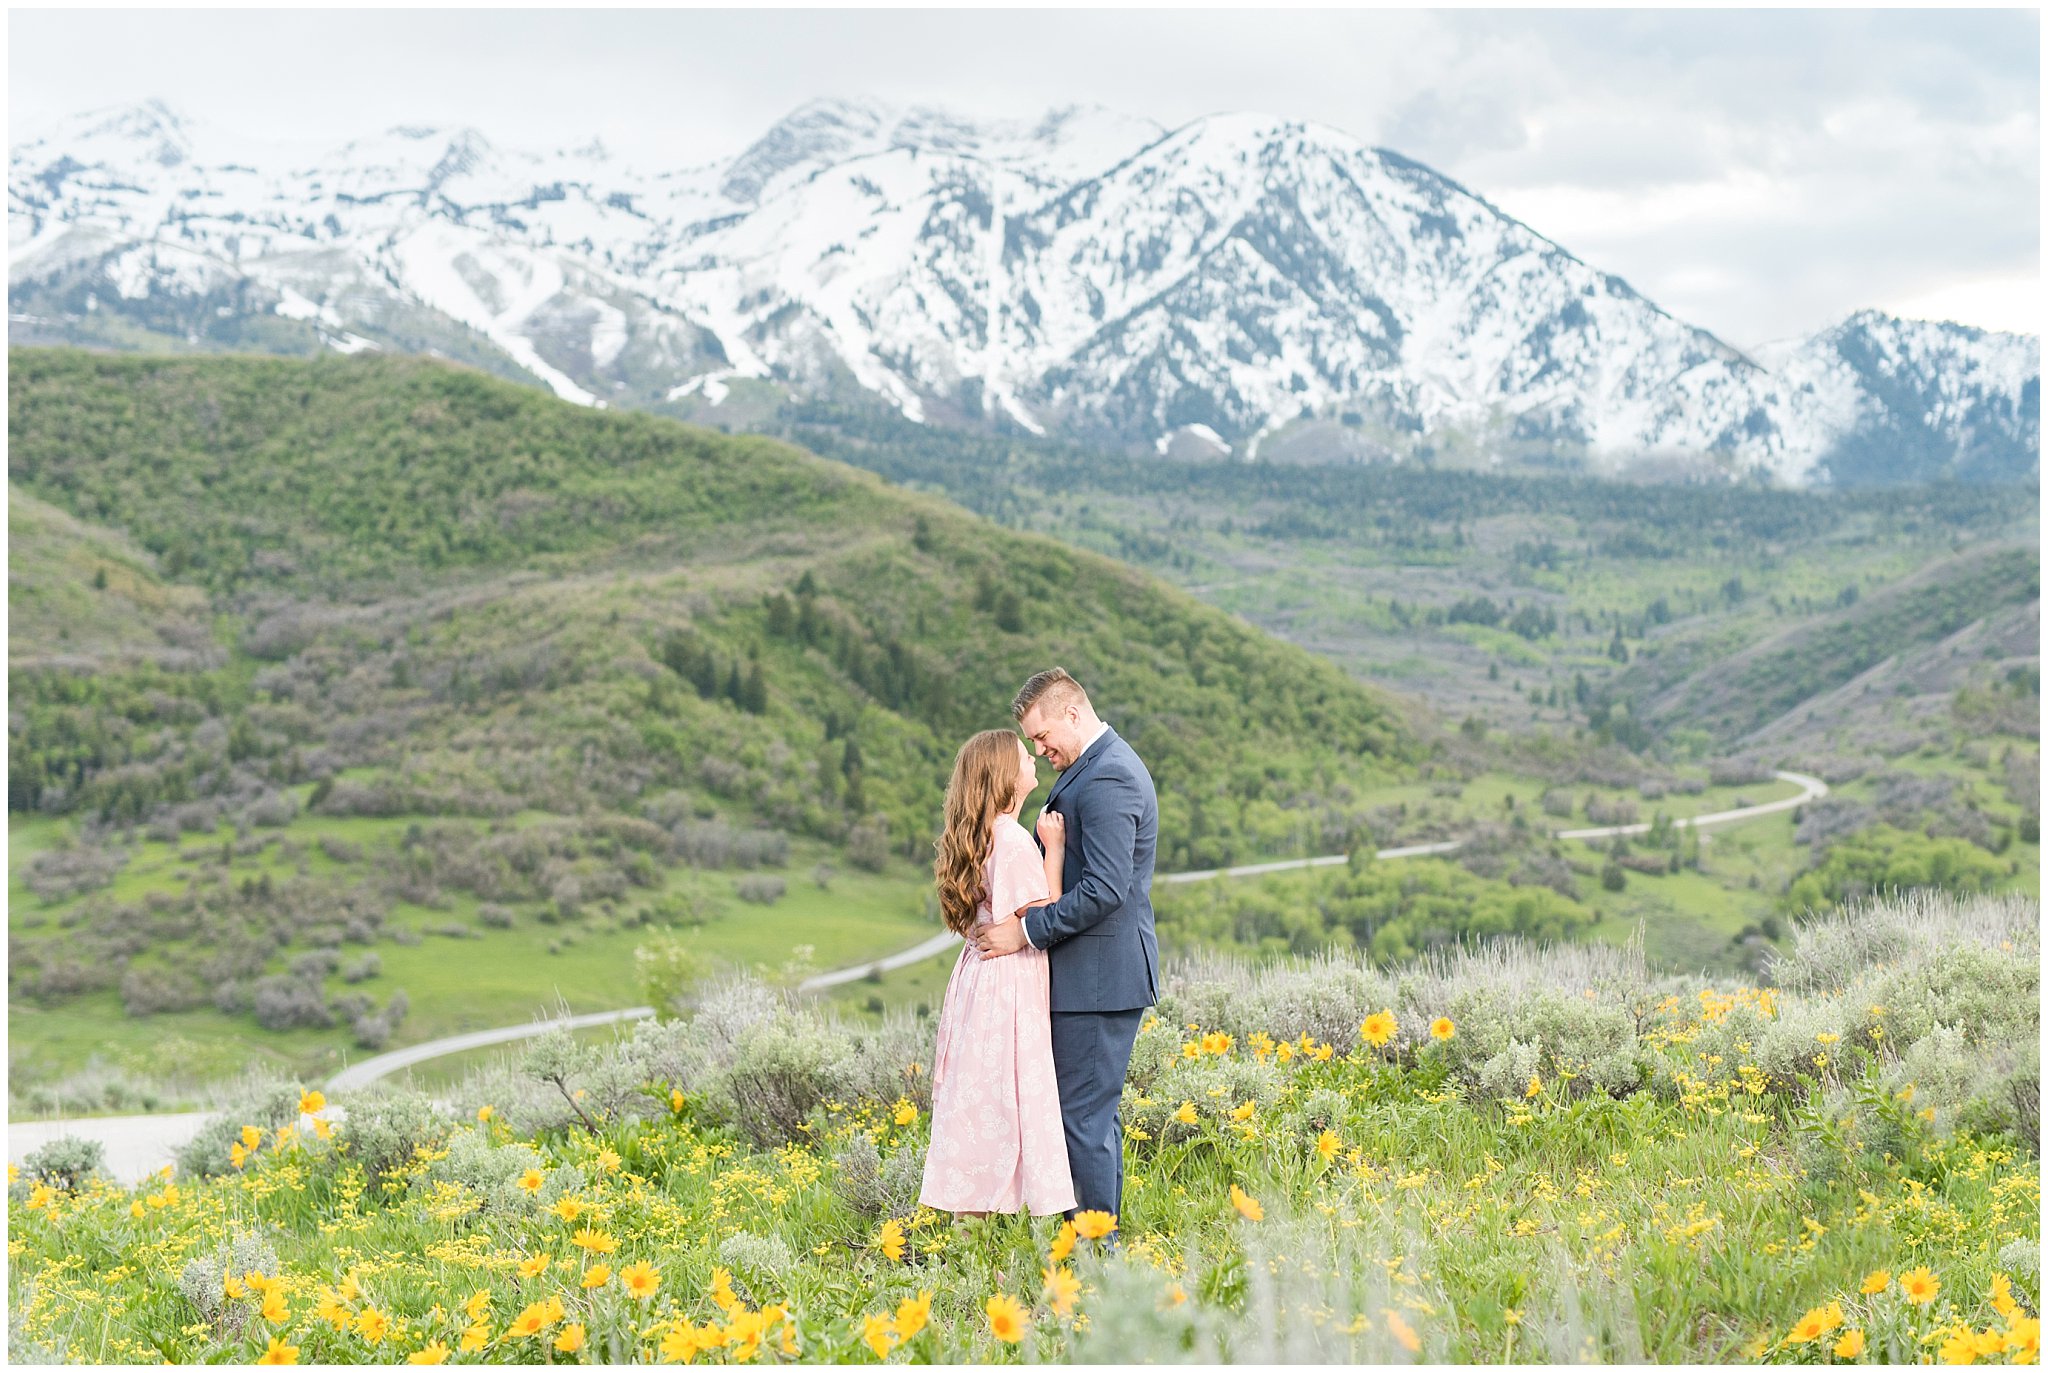 Couple dressed up for formal engagement session in front of snow capped Utah mountains with wildflowers | Top Utah Wedding and Couples Photos 2019 | Jessie and Dallin Photography